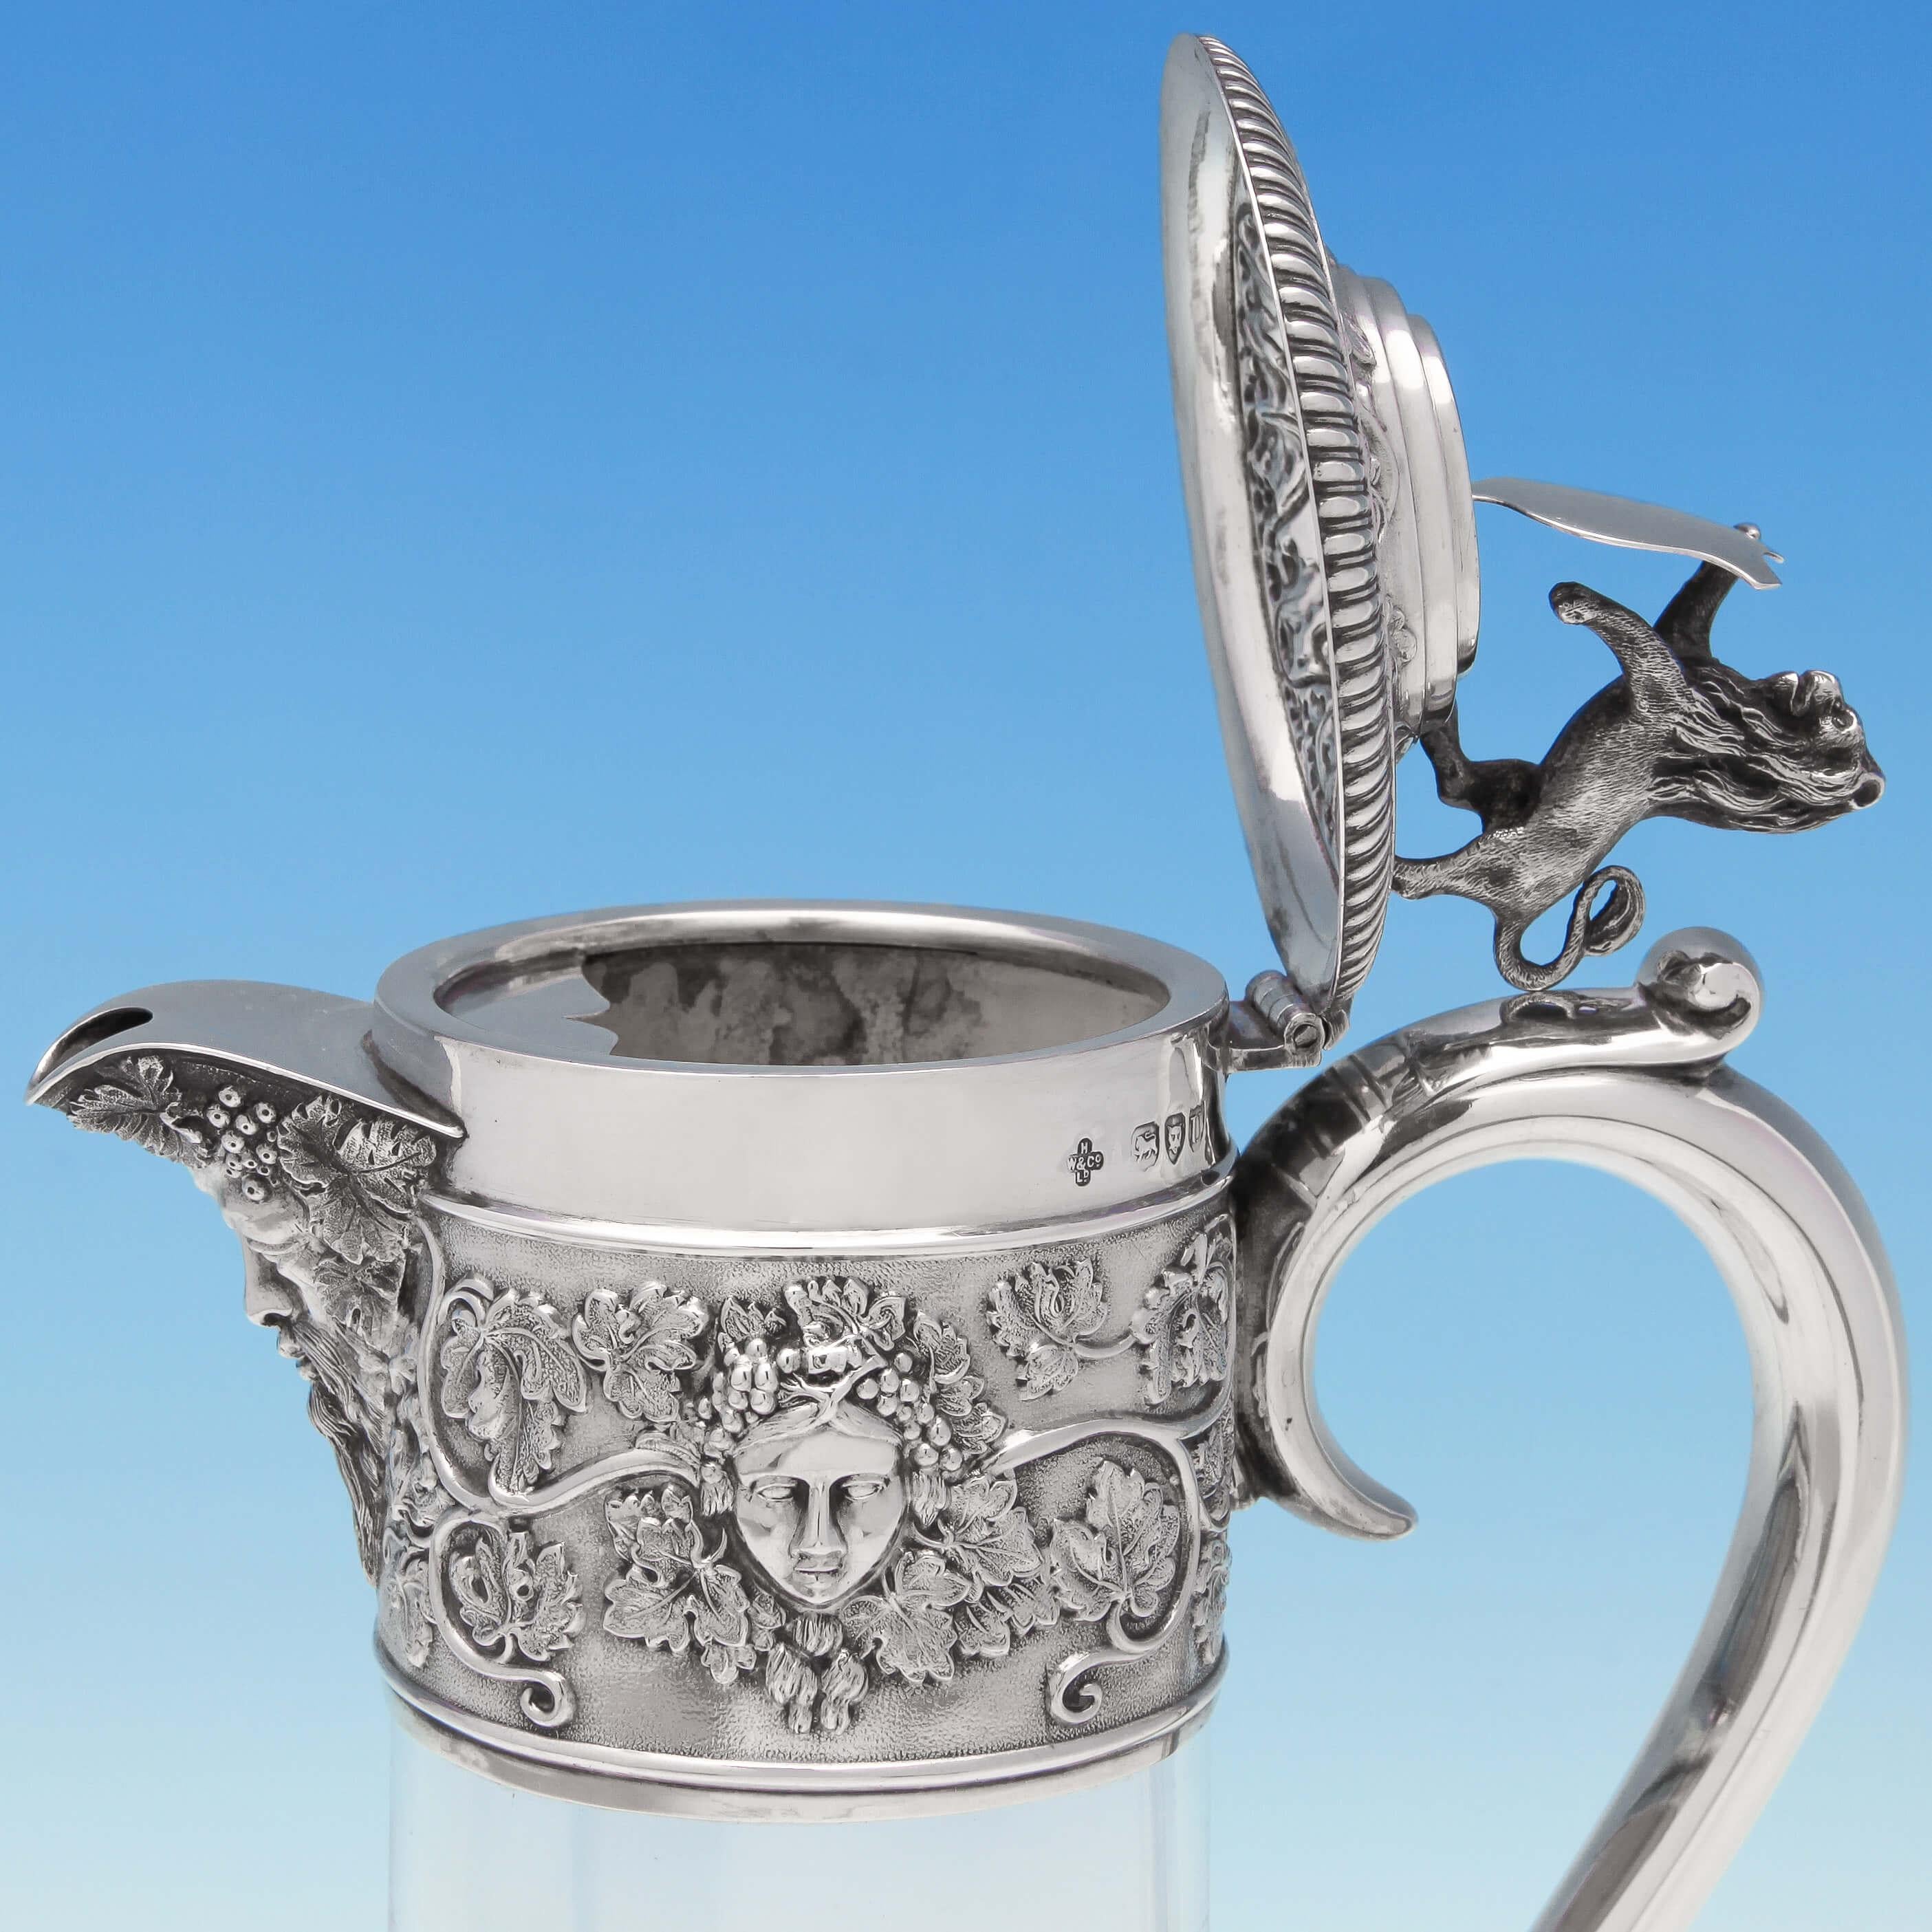 Hallmarked in London in 1895 by Horace Woodward & Co., this fine Antique, Victorian, Sterling Silver Claret Jug comprises of a plain glass body with an elaborately chased silver mount featuring grape and vine decoration, Bacchus masks and a finial